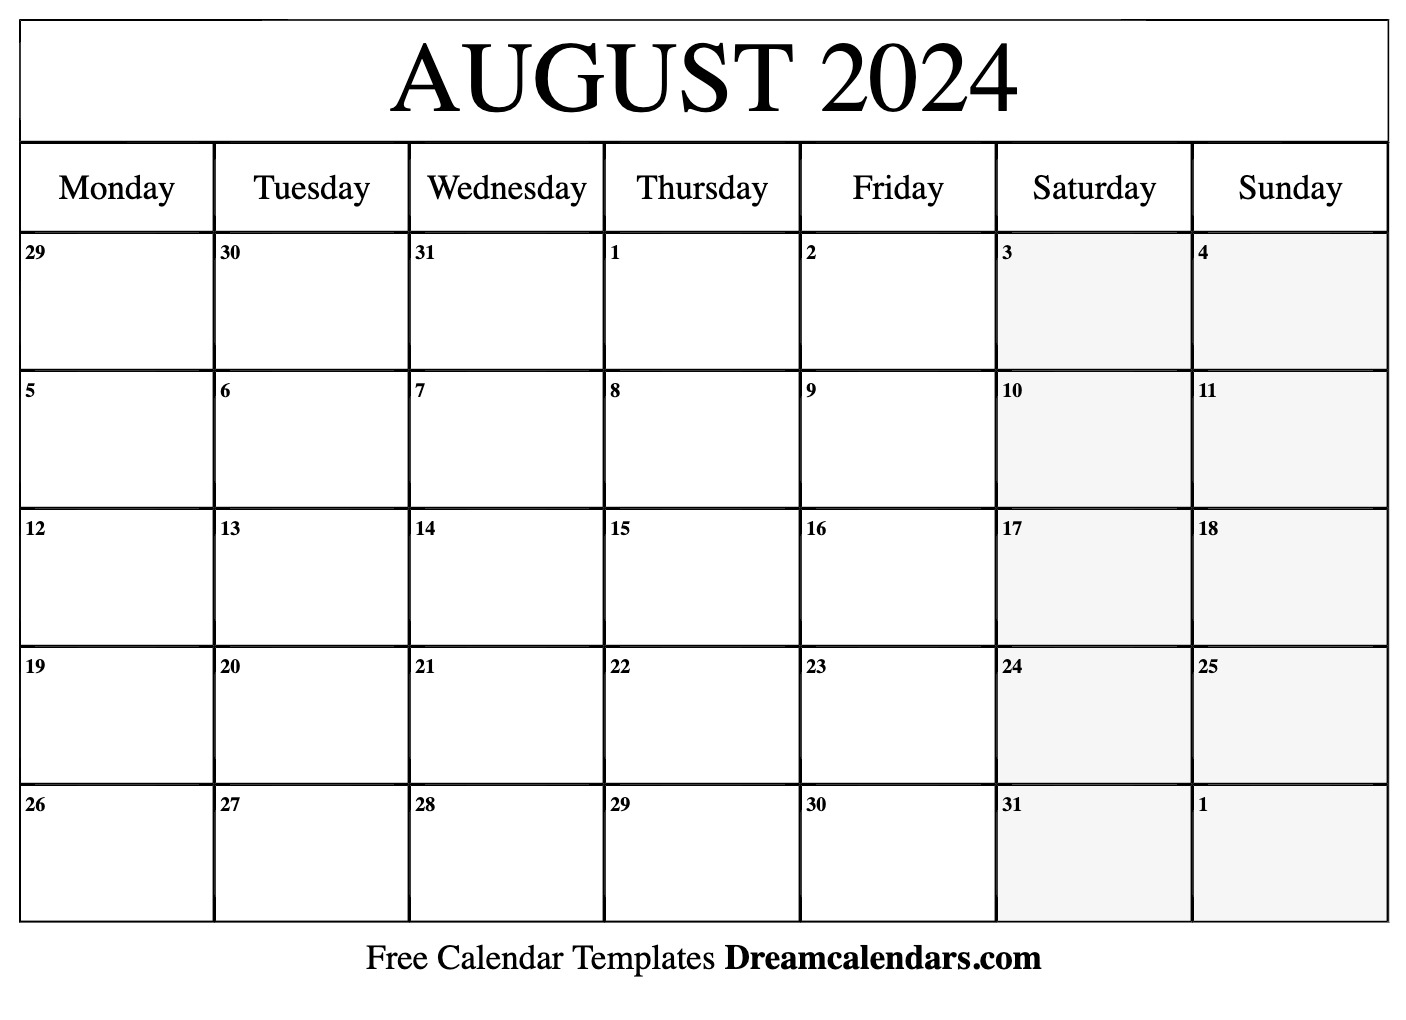 August 2024 Calendar | Free Blank Printable With Holidays for Free Printable July And August 2024 Calendar